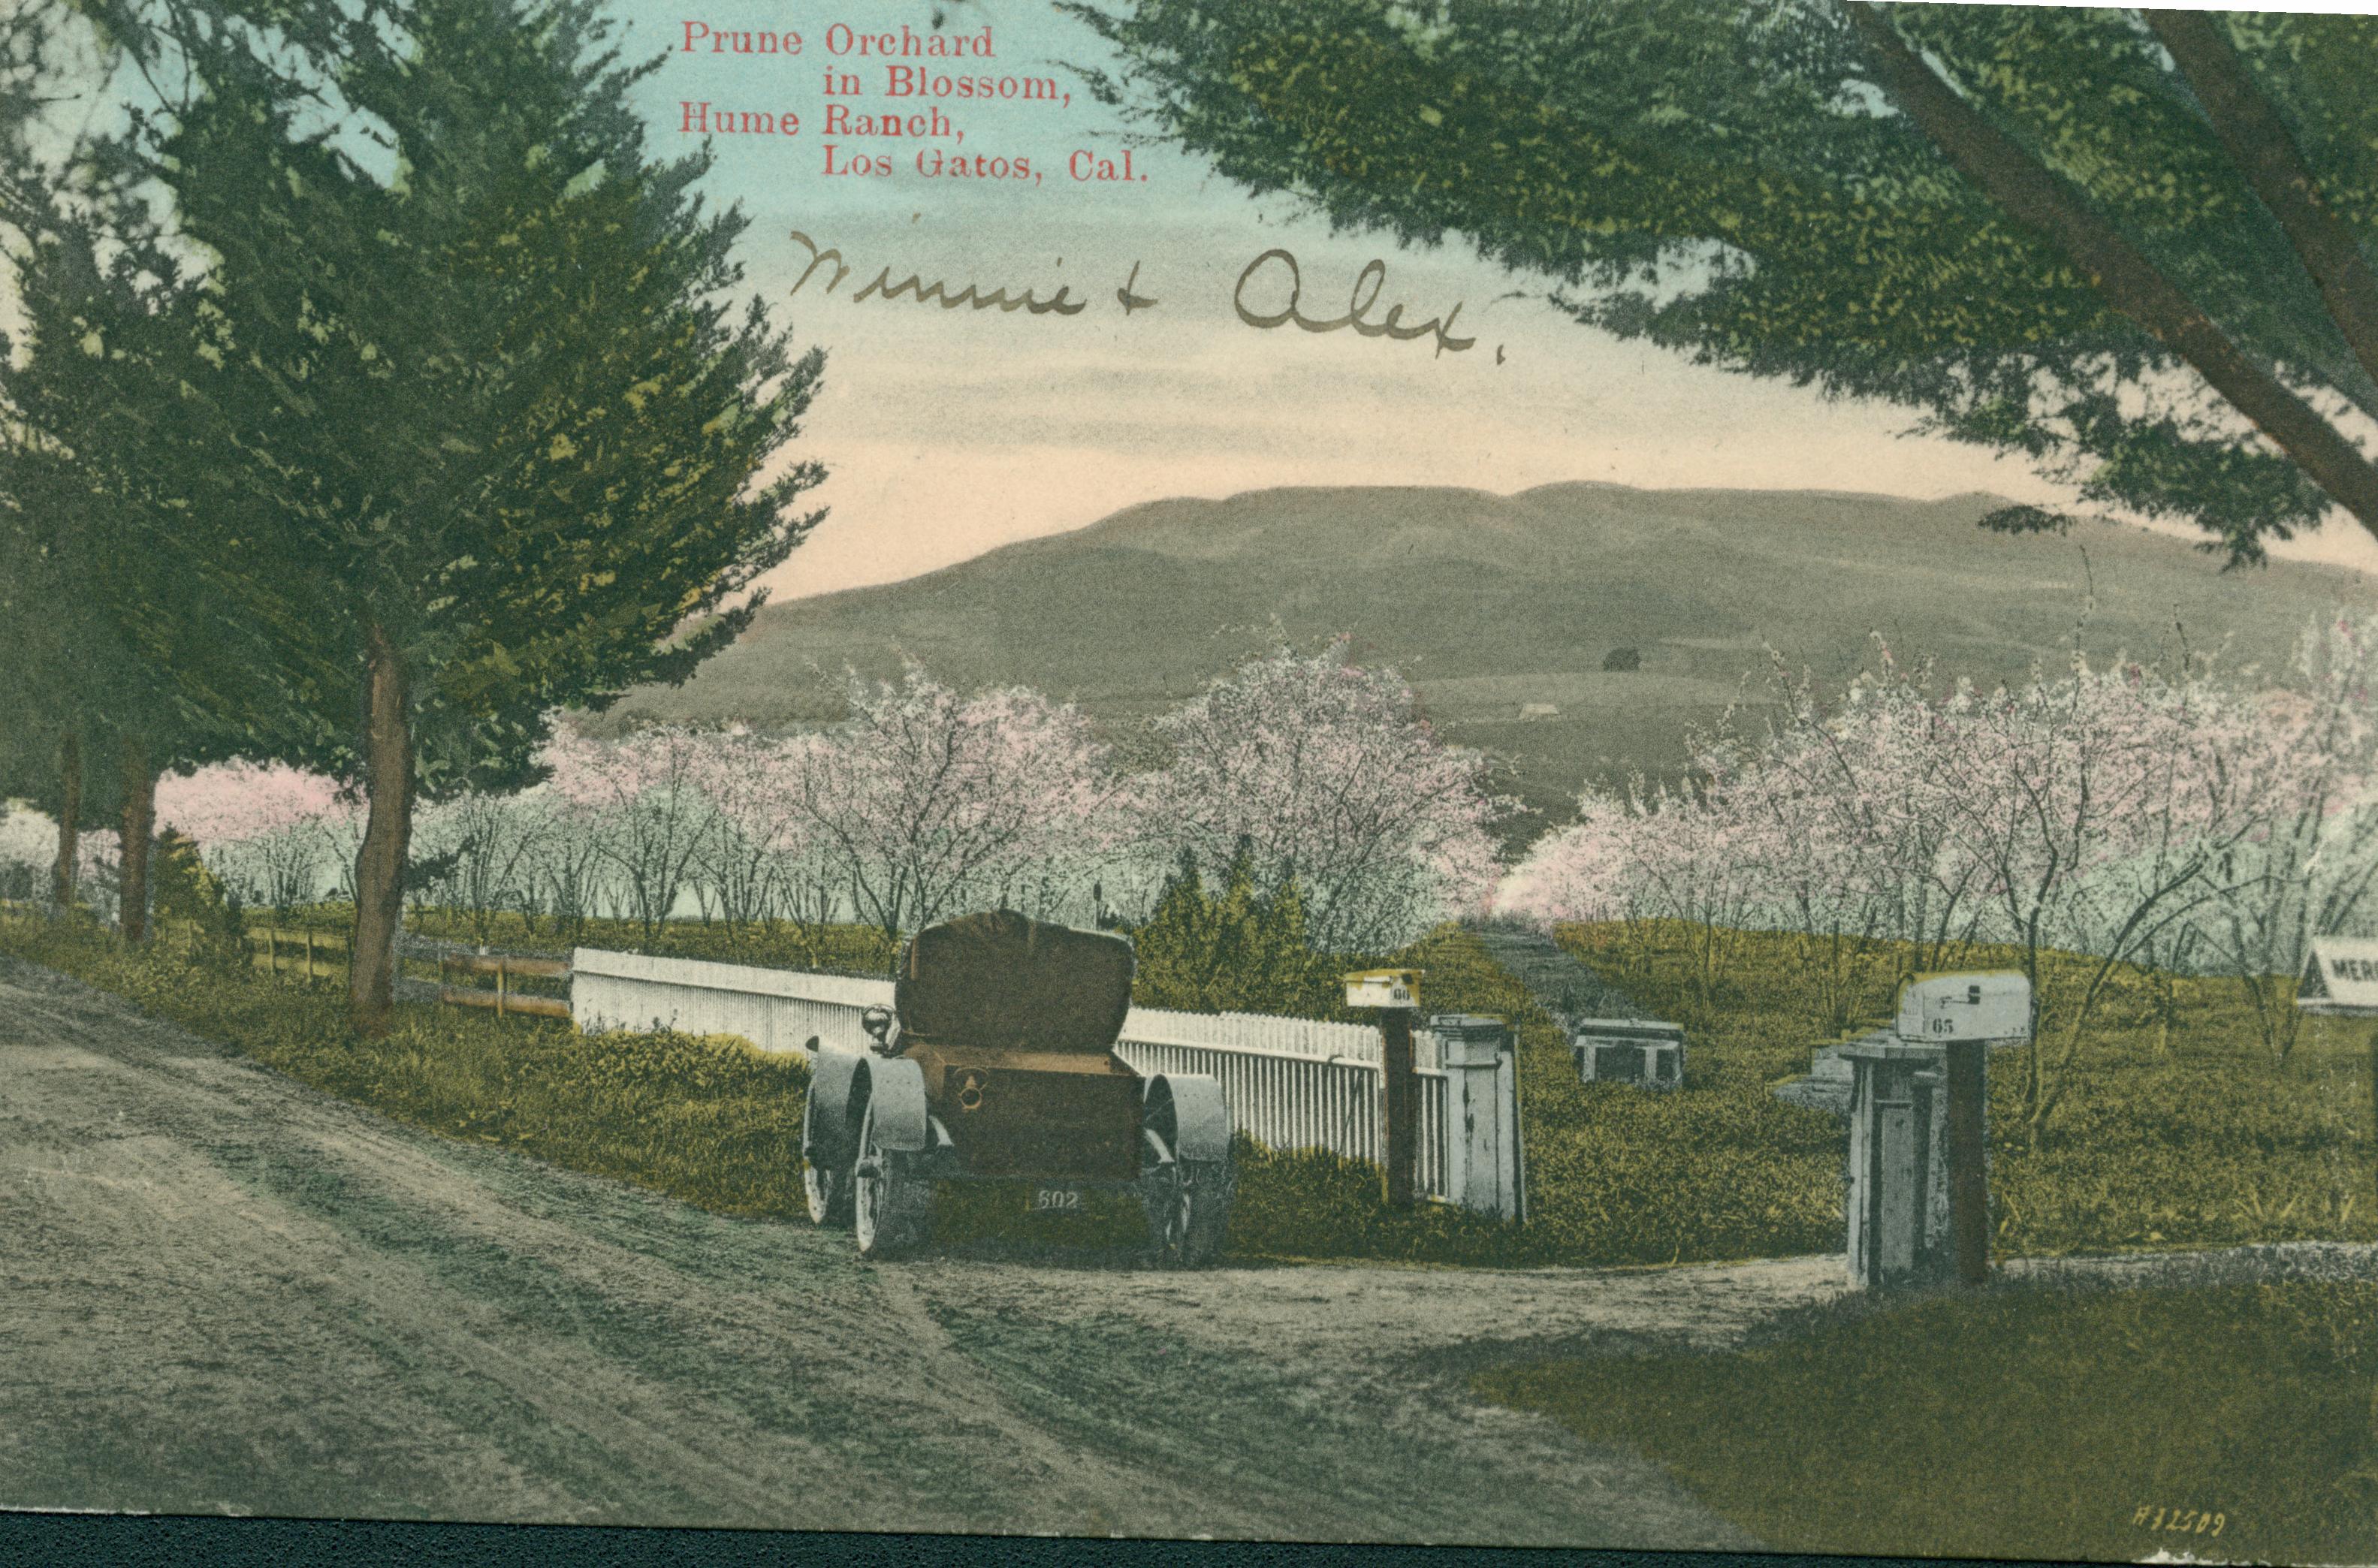 Prune orchard in bloom, with automobile parked on side of dirt road, white picket fence and mailbox borders the road and orchard.  Tall trees line the road between the road and orchard fence, rolling hills in the background